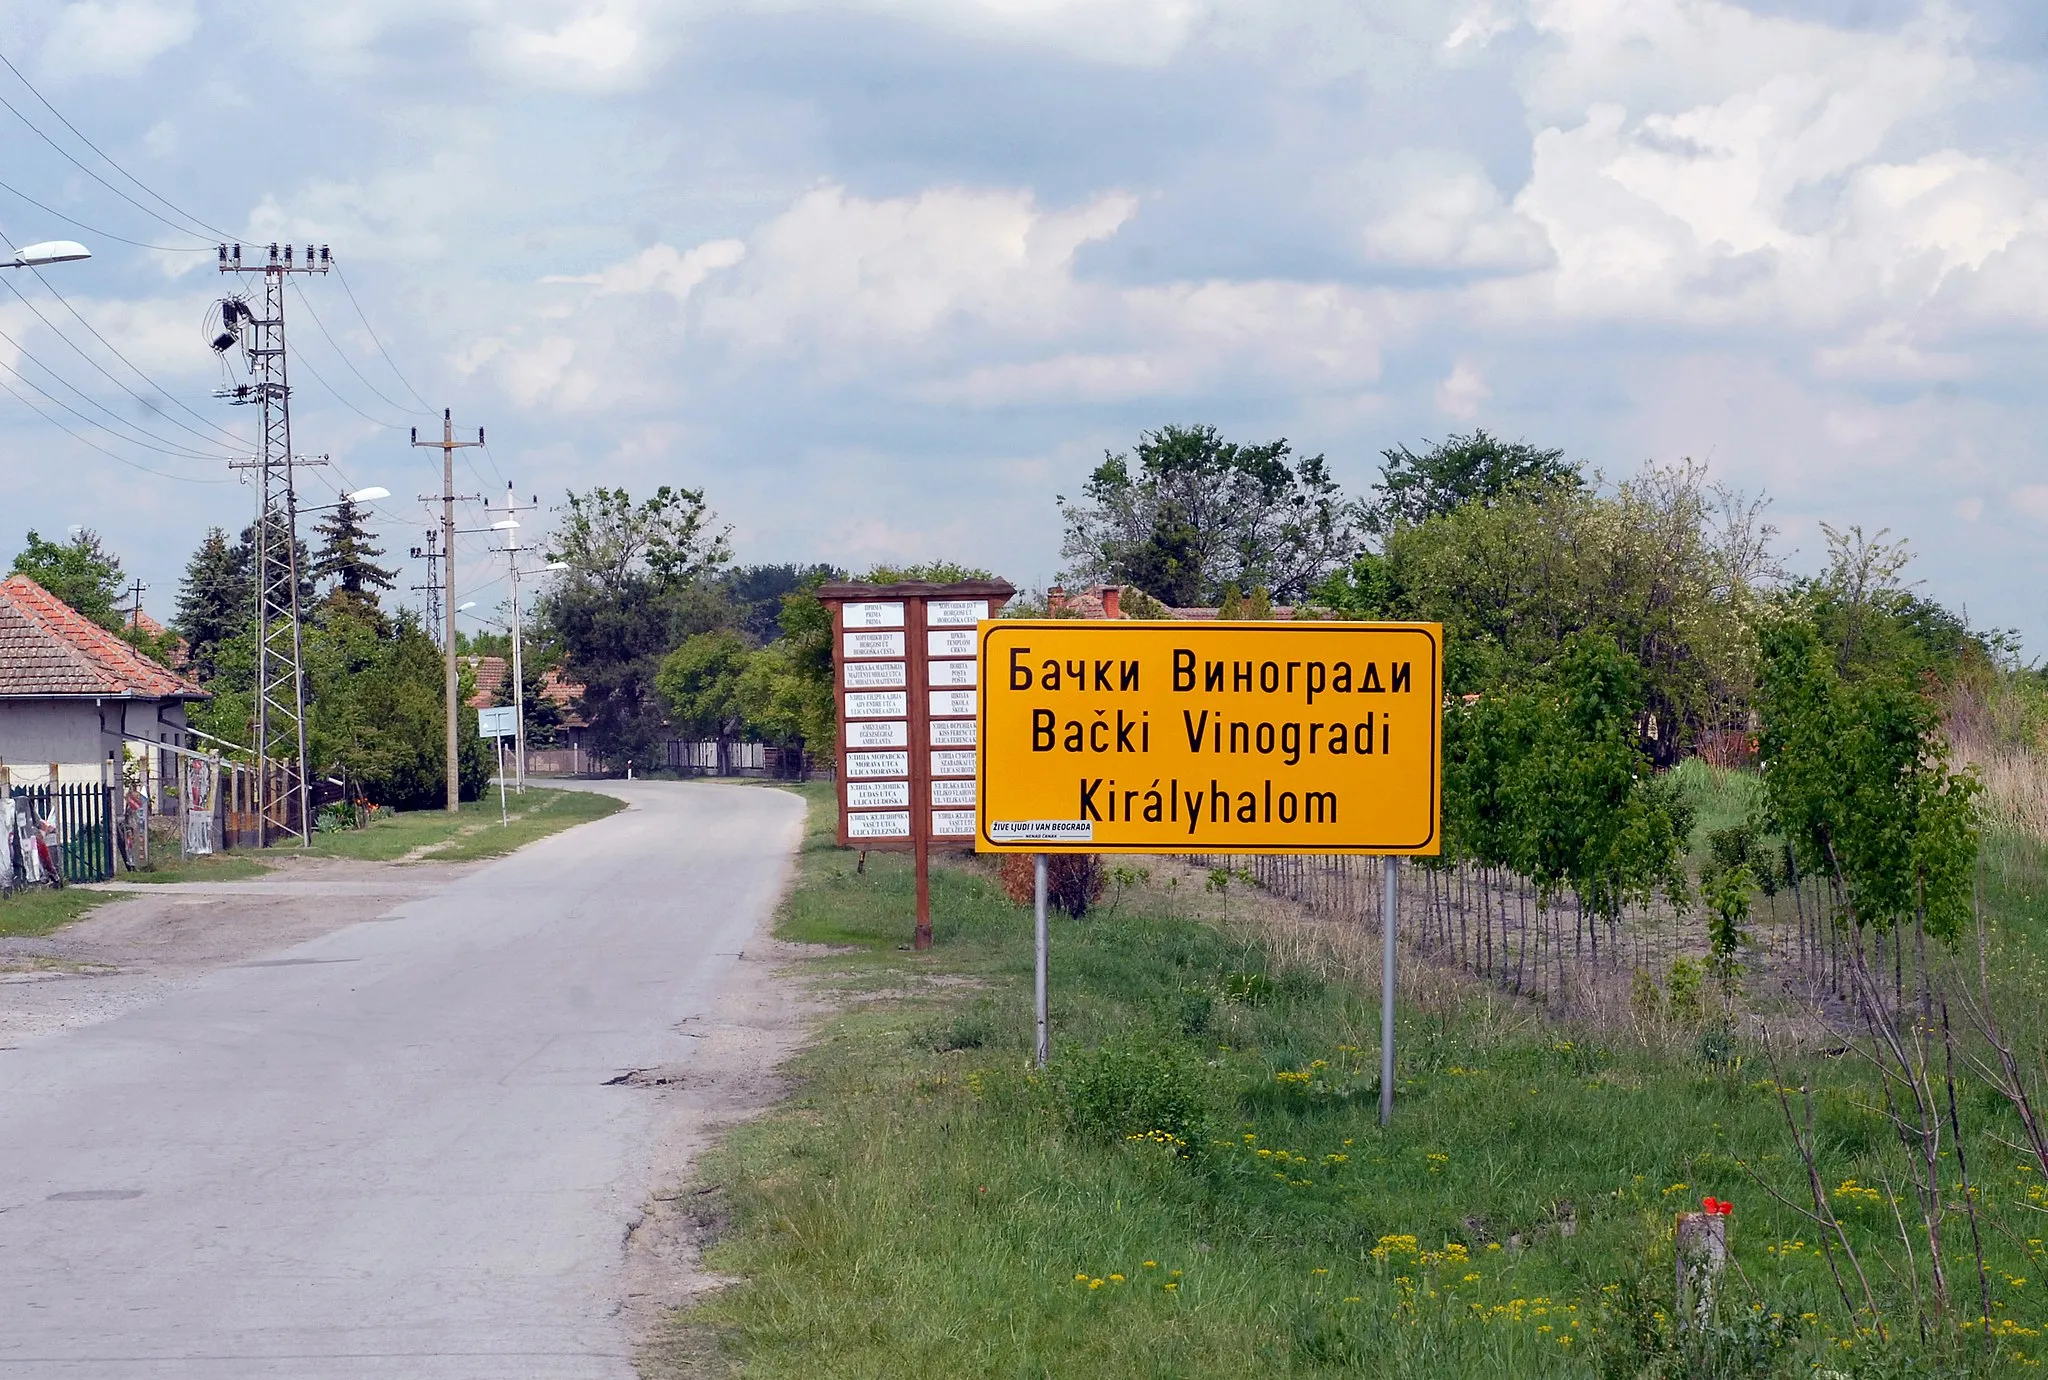 Photo showing: Enthrance sign of Bački Vinogradi in Serbia, a nice example of (still intact) multilingual road signs in Serbia. Notice the vitty opposition-party sticker that says "People live outside Belgrade too"